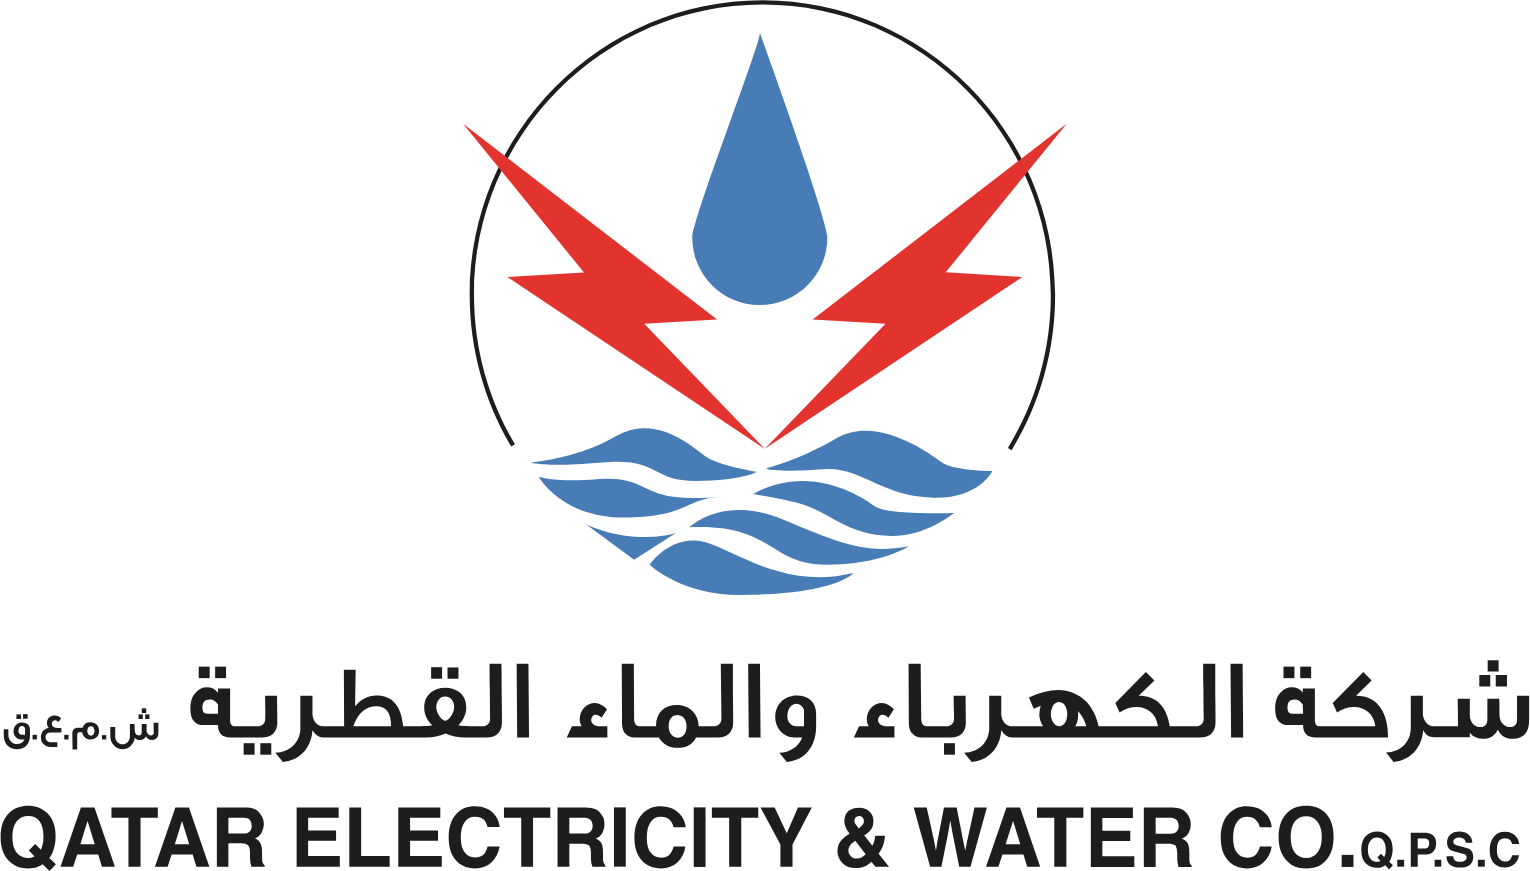 Qatar Electricity & Water Company logo large (transparent PNG)